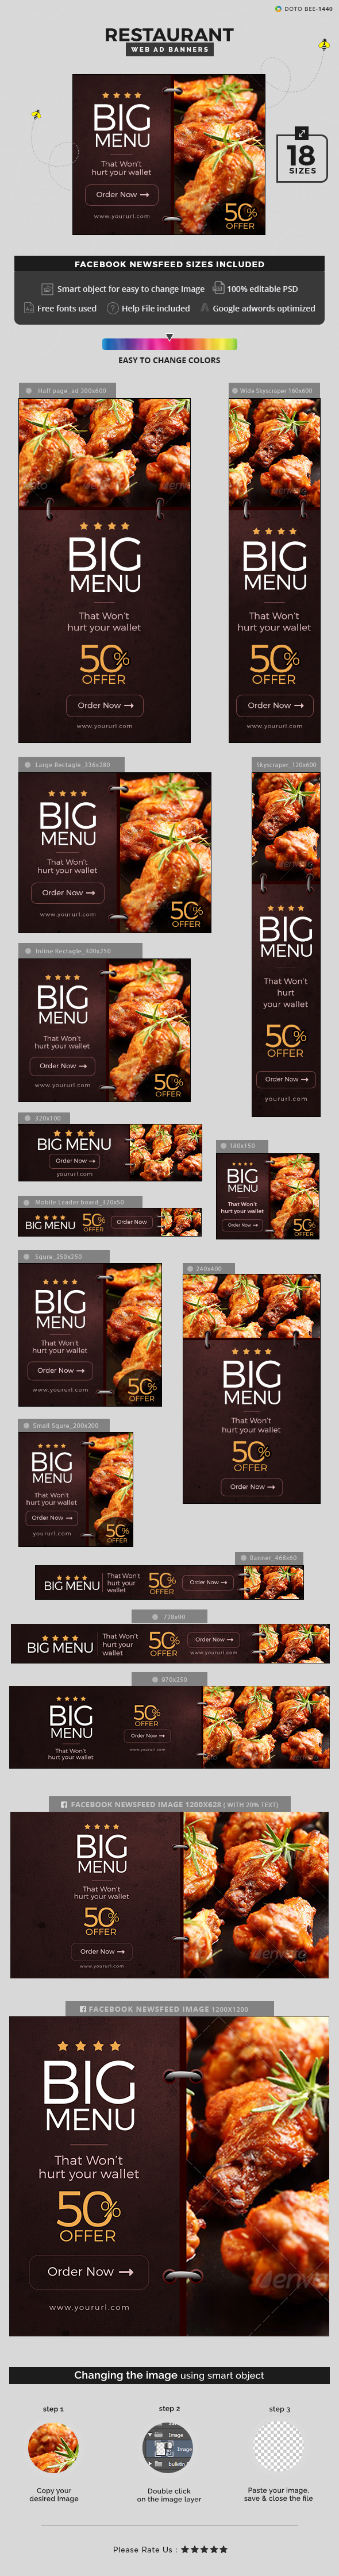 adroll Animated Banner banner pack banner set banners business COUPON Deal discount eat fastfood flat design Food 